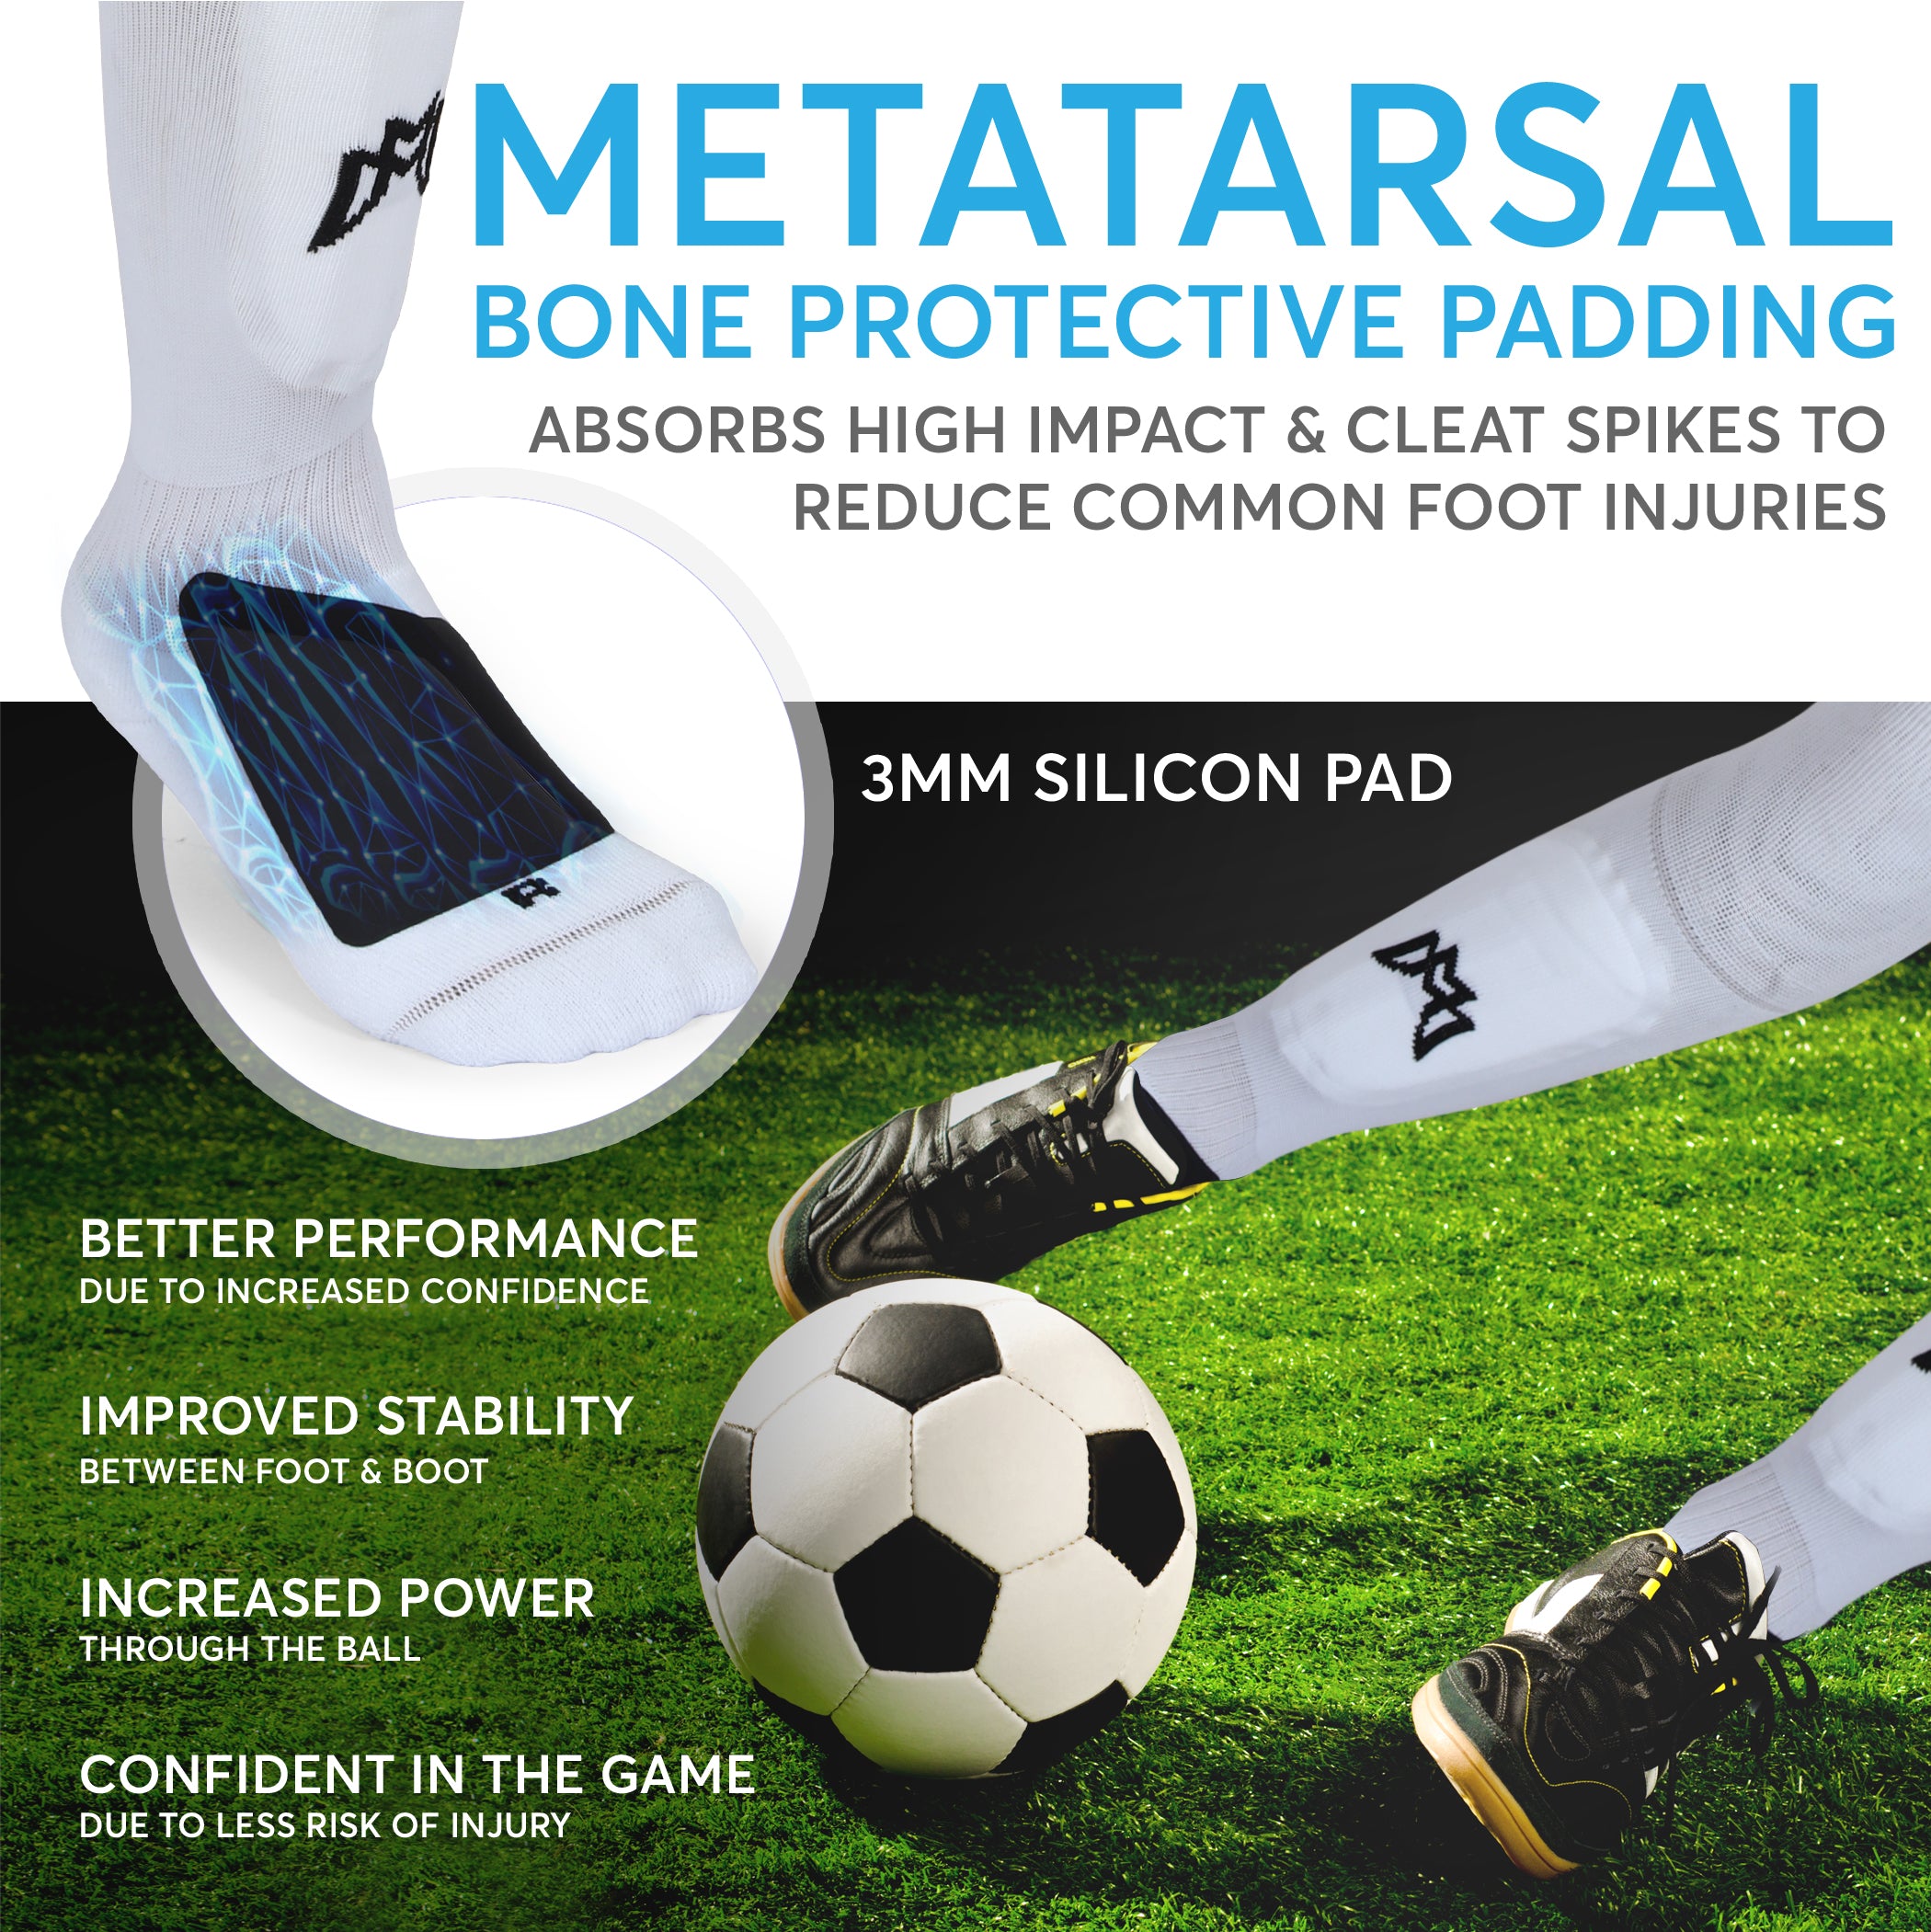 MediCaptain™ Ultimate ALL IN ONE Soccer Sock with Shin Guard - Metatarsal Pad - Anti Slip Grip Technology